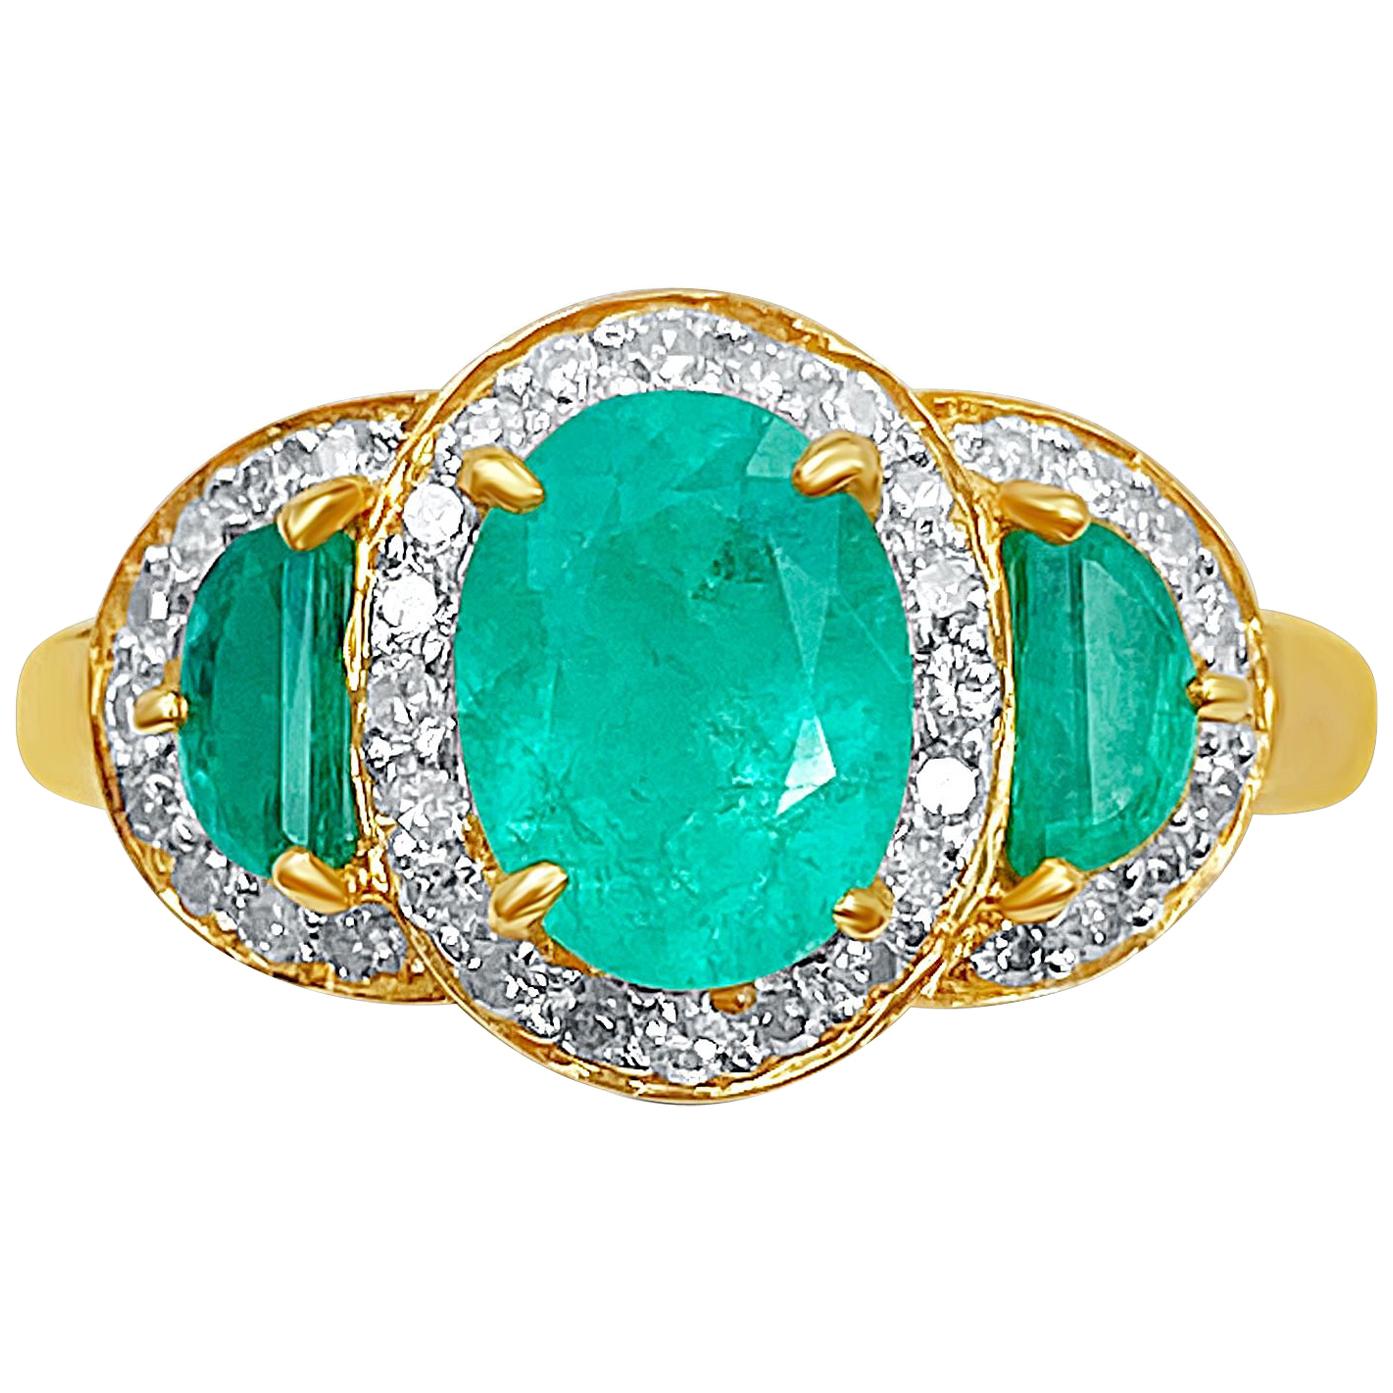 1.60 Carat Oval Cut Colombian Emerald, Diamond, and 18K Yellow Gold Ring